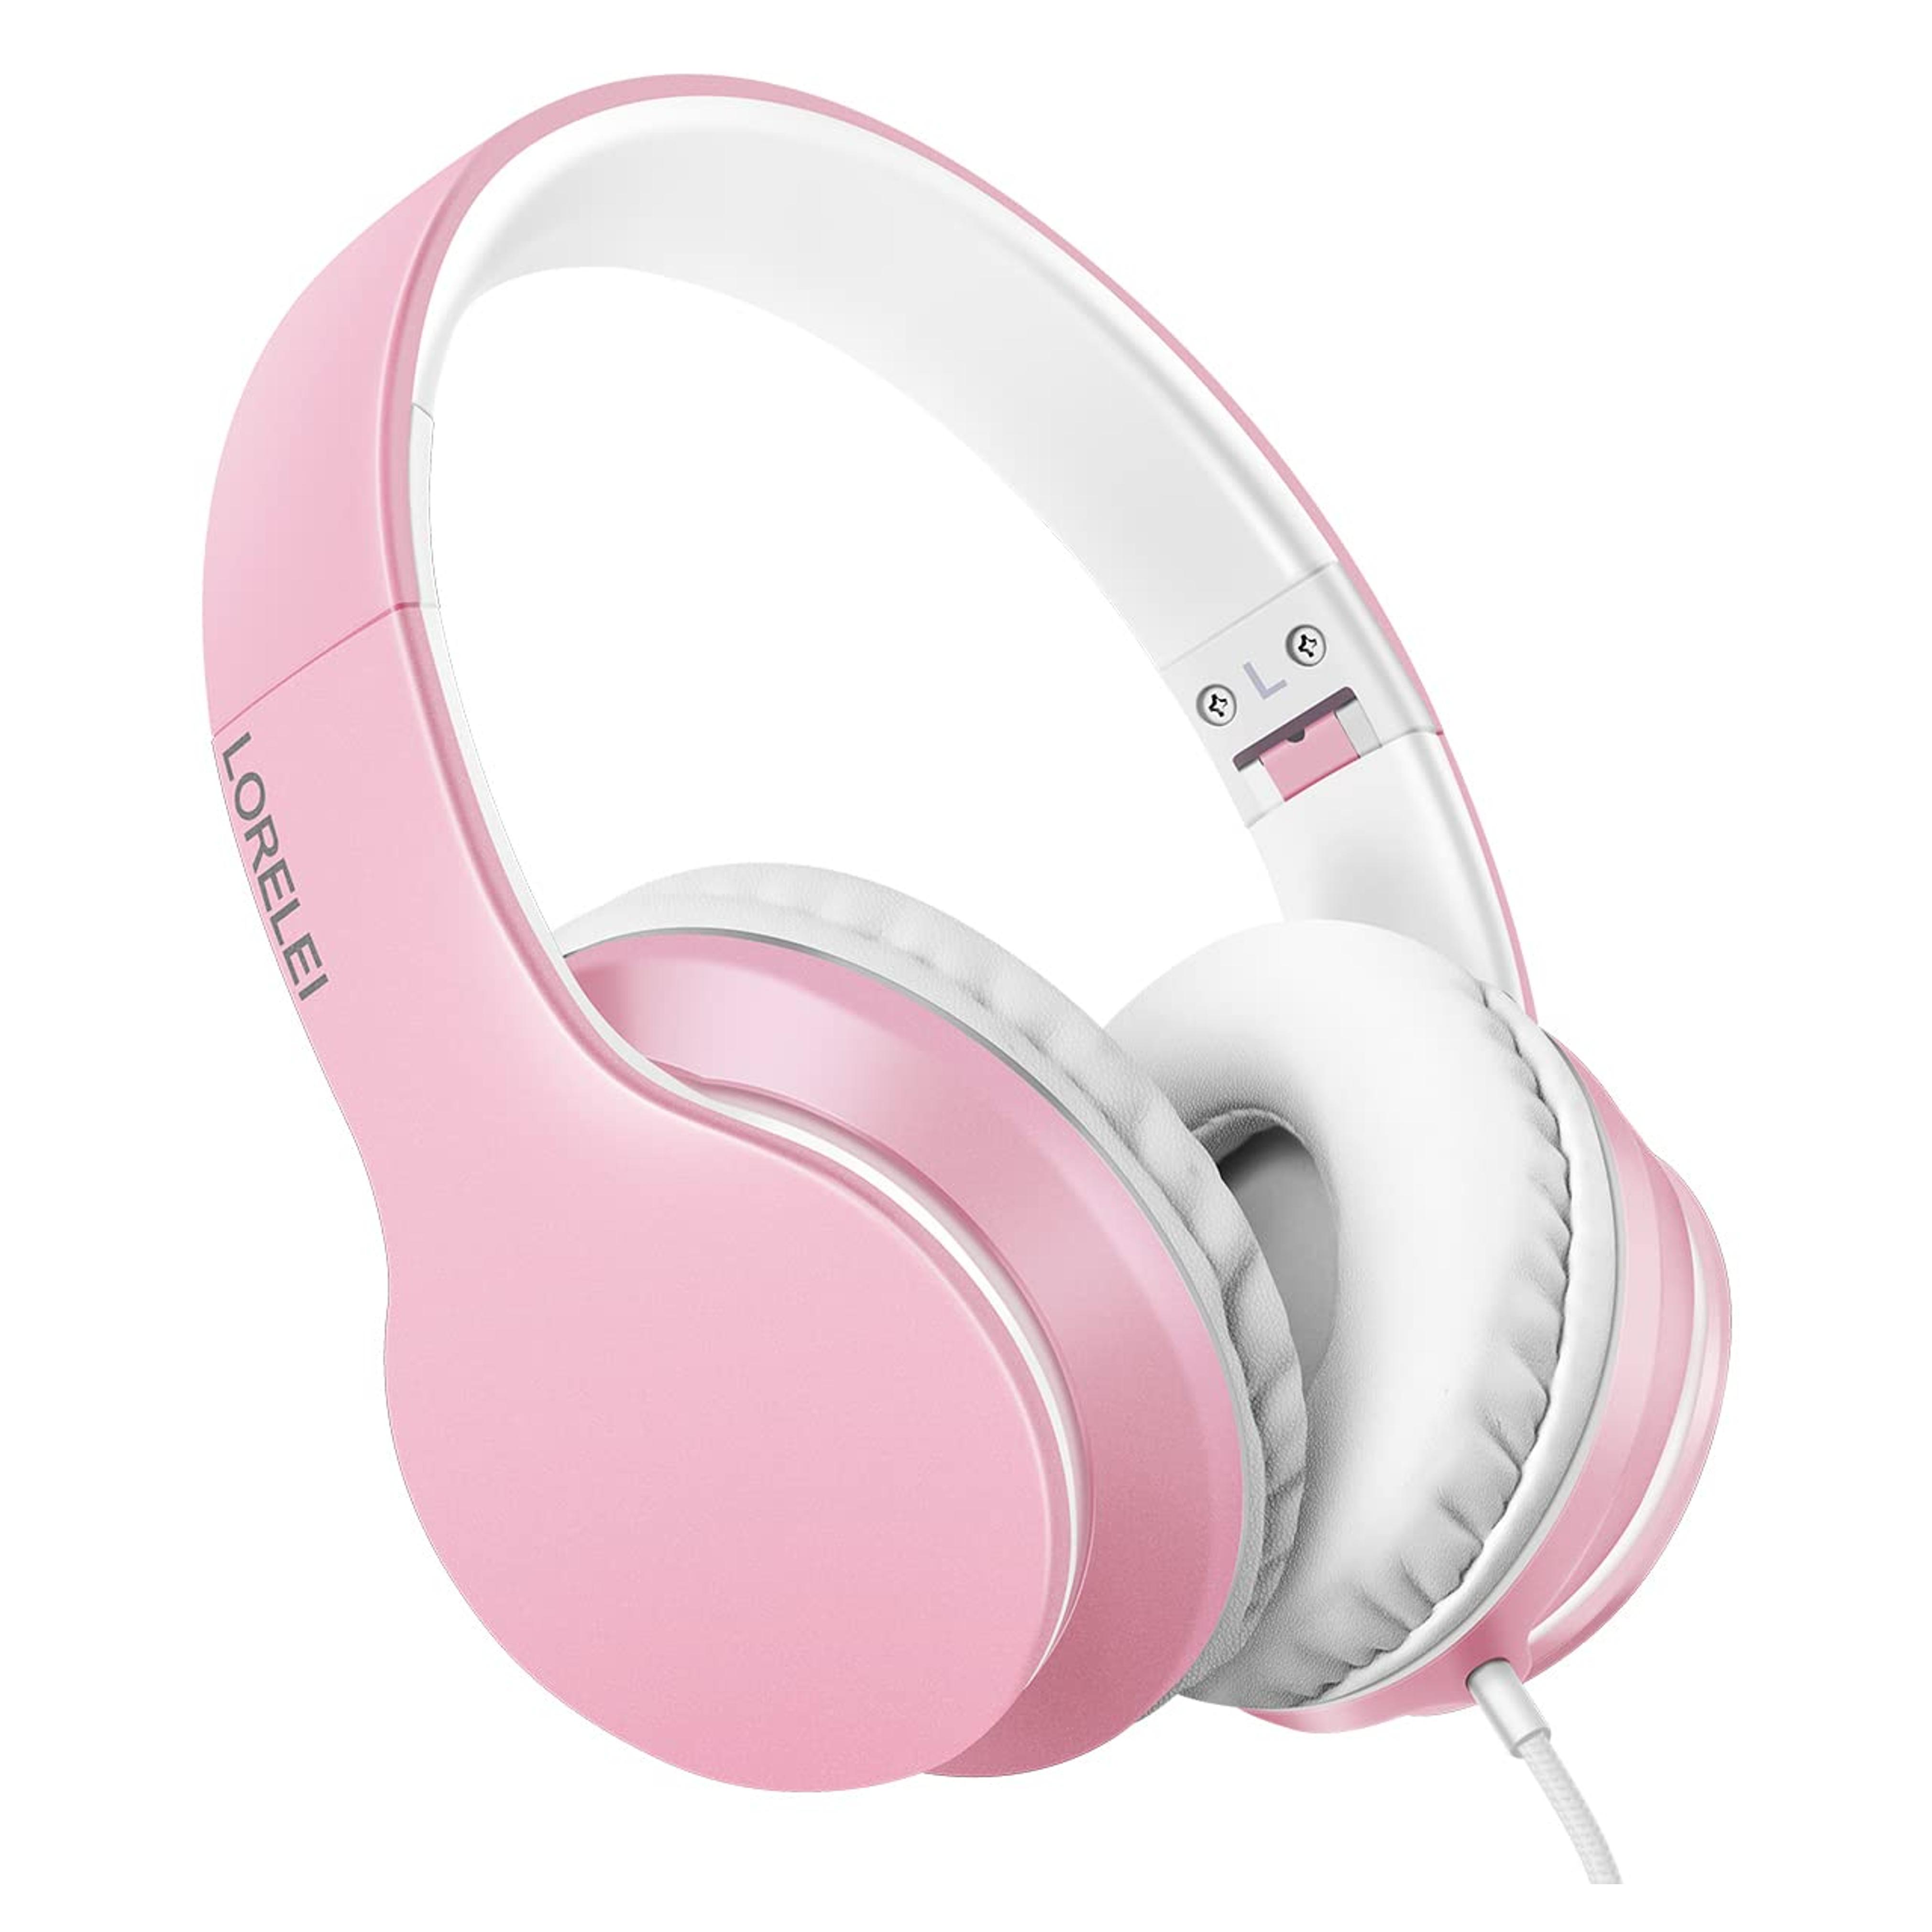 Amazon.com: LORELEI X6 Over-Ear Headphones with Microphone, Lightweight Foldable & Portable Stereo Bass Headphones with 1.45M No-Tangle, Wired Headphones for Smartphone Tablet MP3 / 4 (Pearl Pink) : Electronics